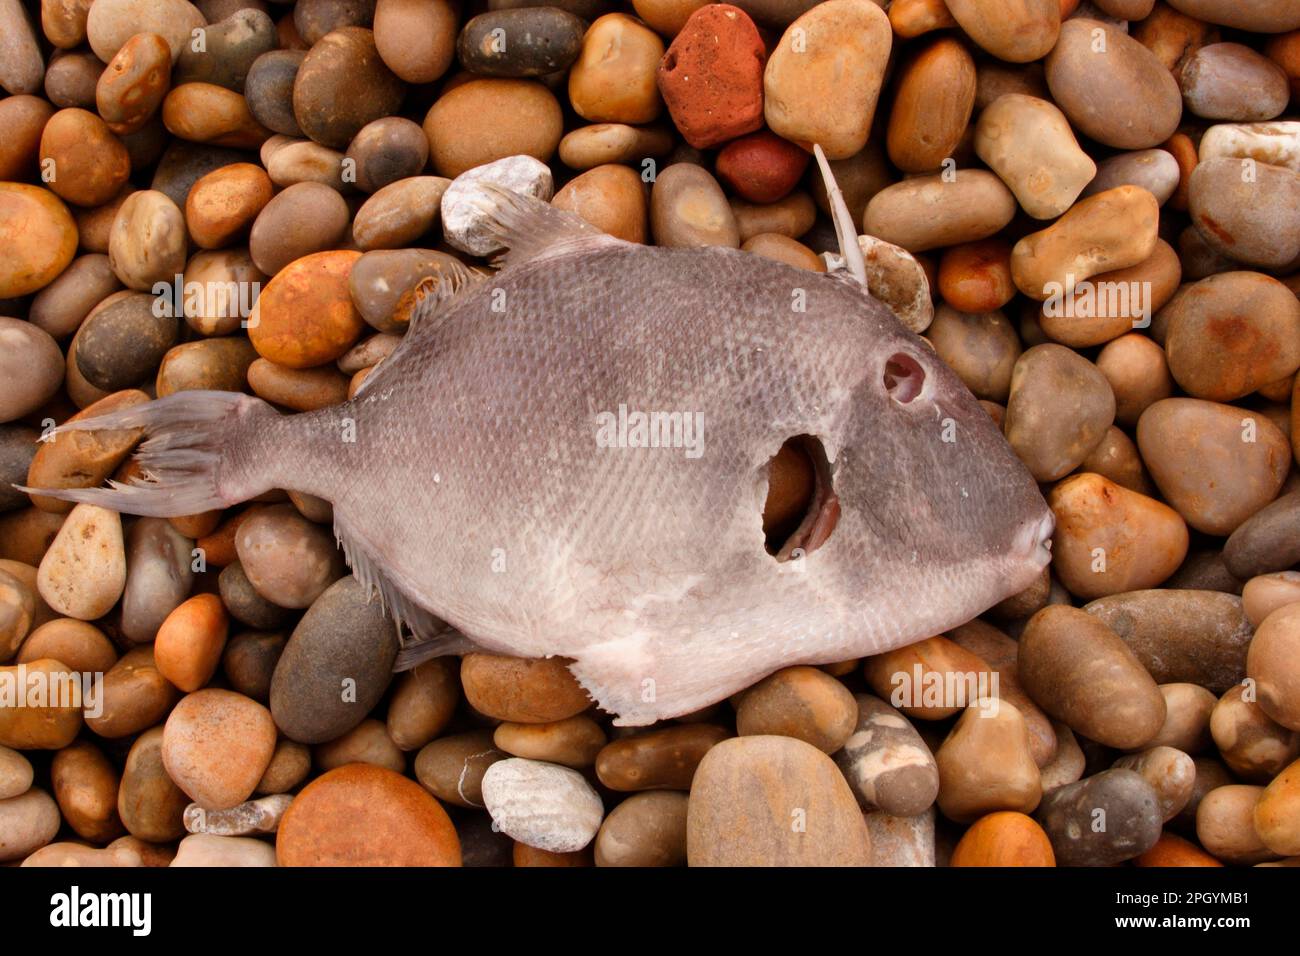 Grey Triggerfish (Balistes capriscus) dead, eyes and gills pecked out, washed-up on beach, Chesil Beach, Dorset, England, United Kingdom Stock Photo